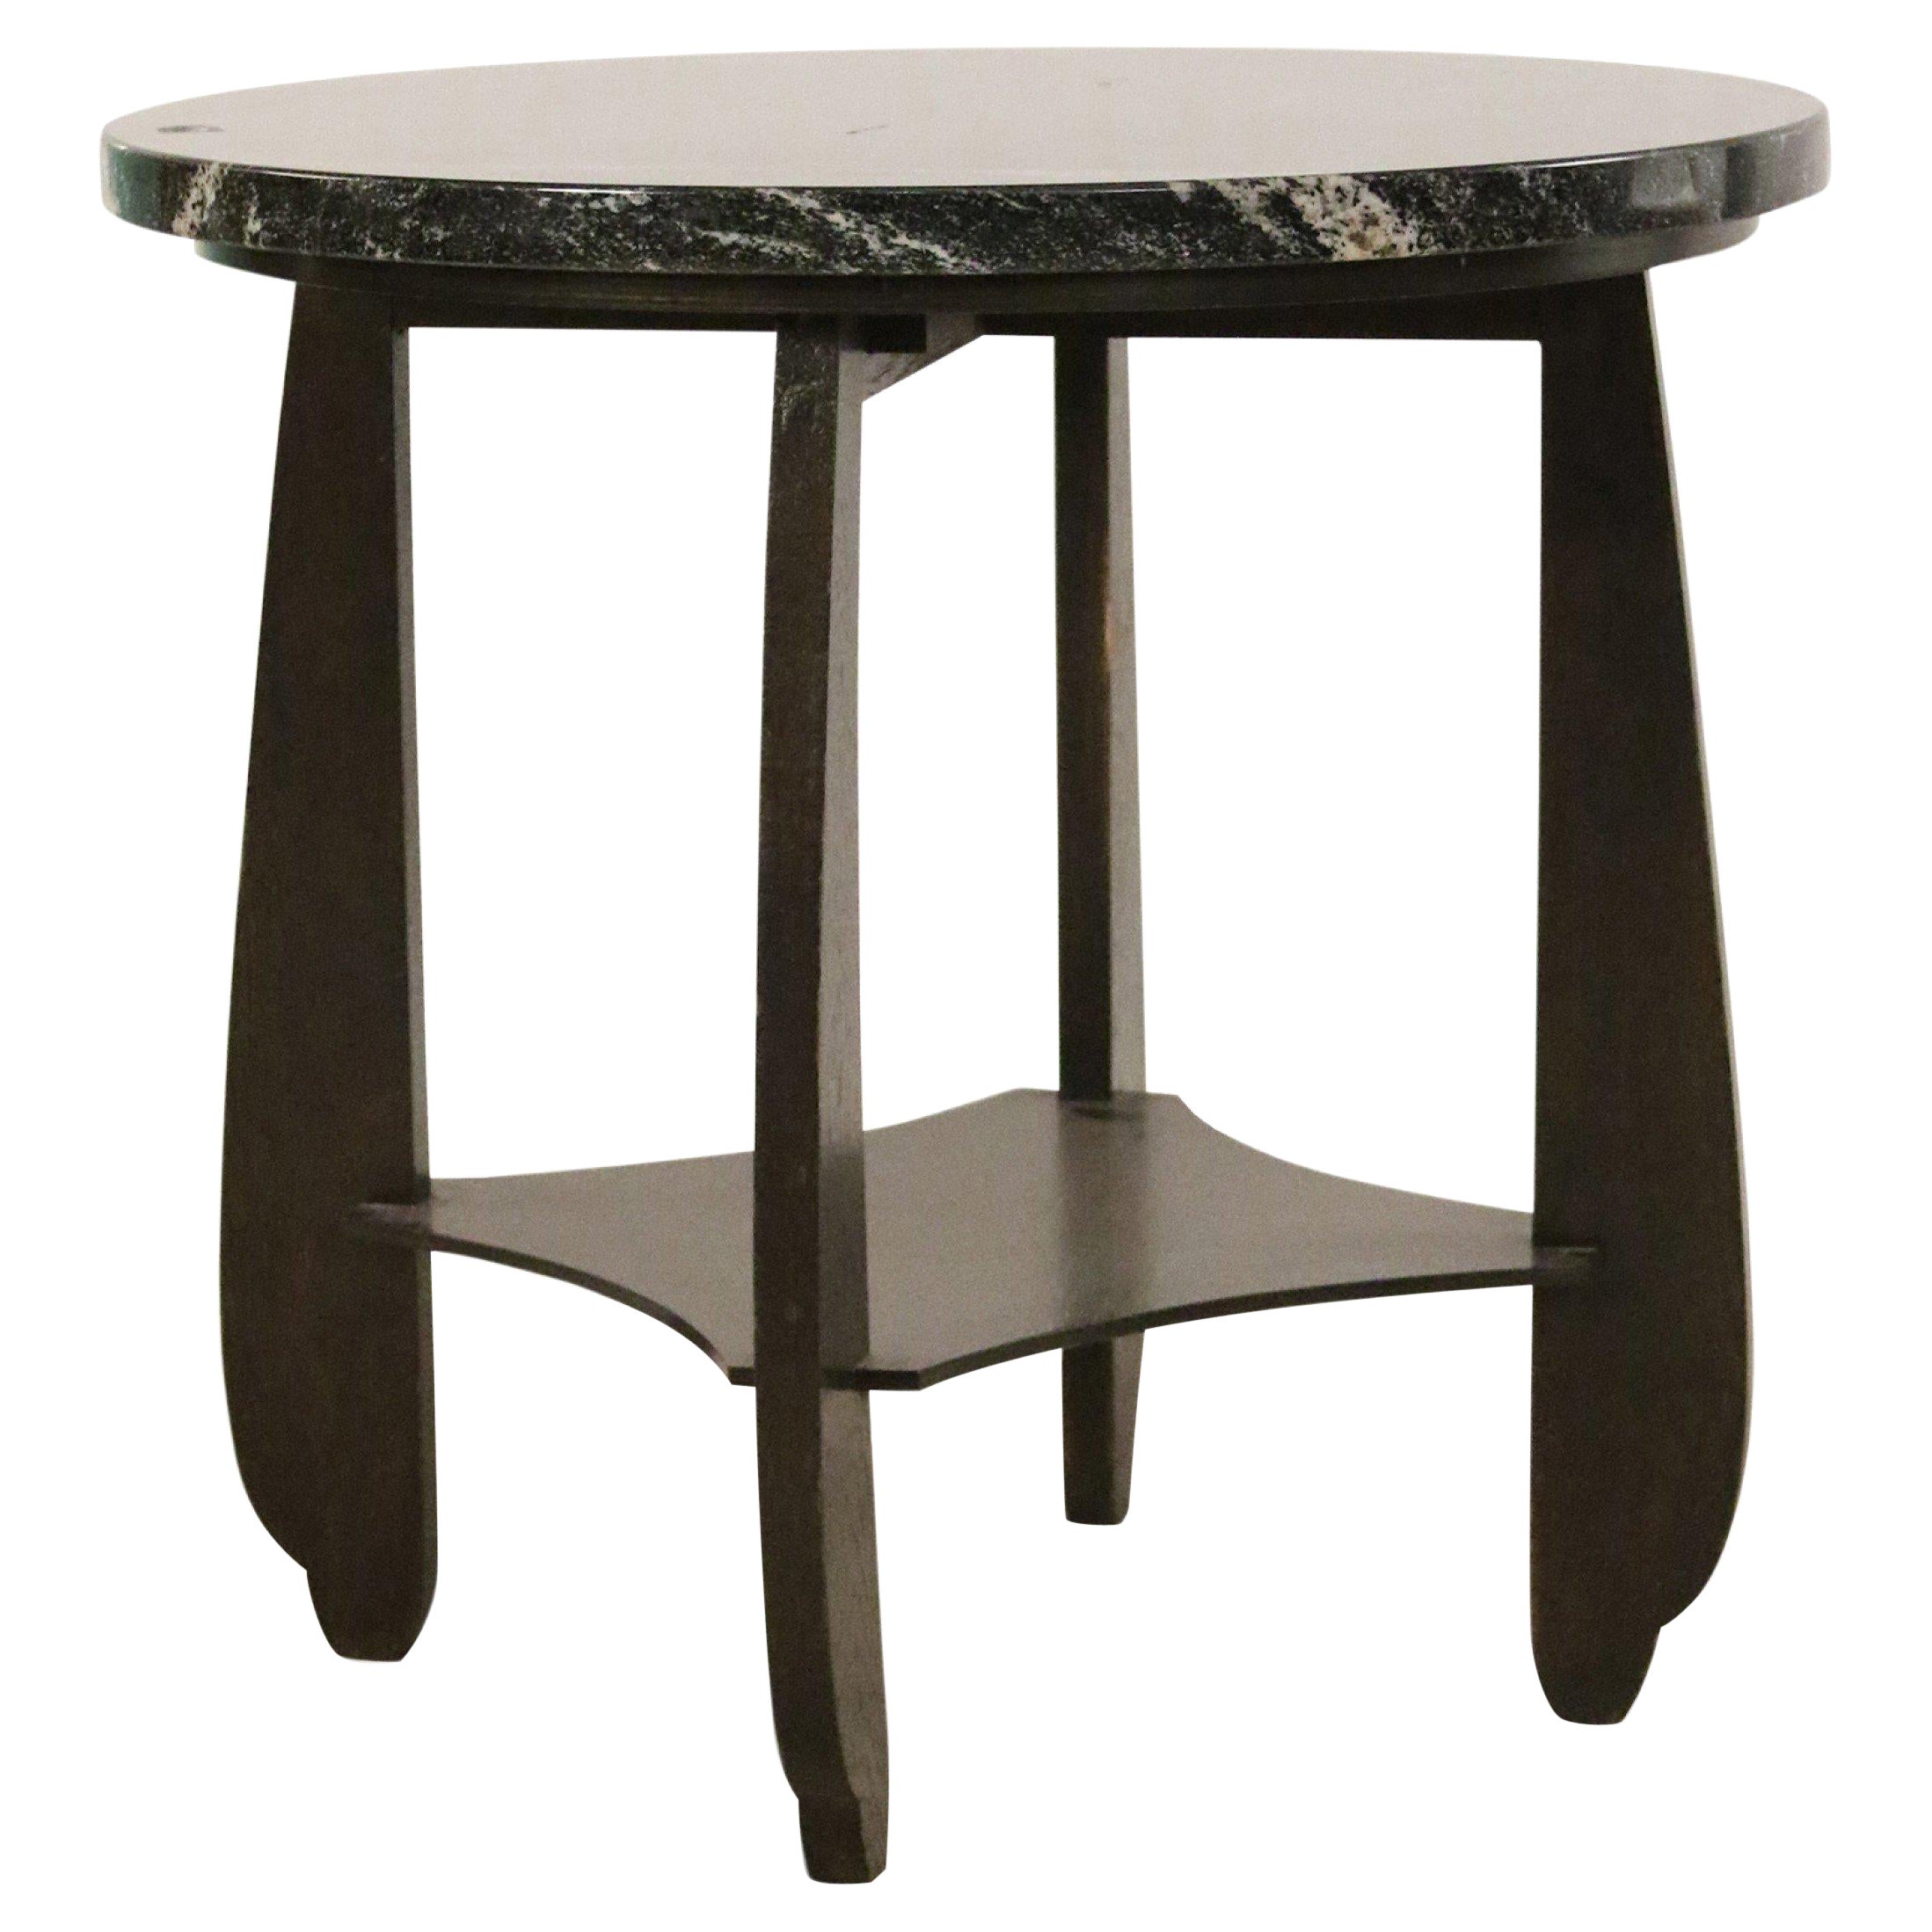 American Art Deco Style Round Marble and Lacquered Wood End Table For Sale